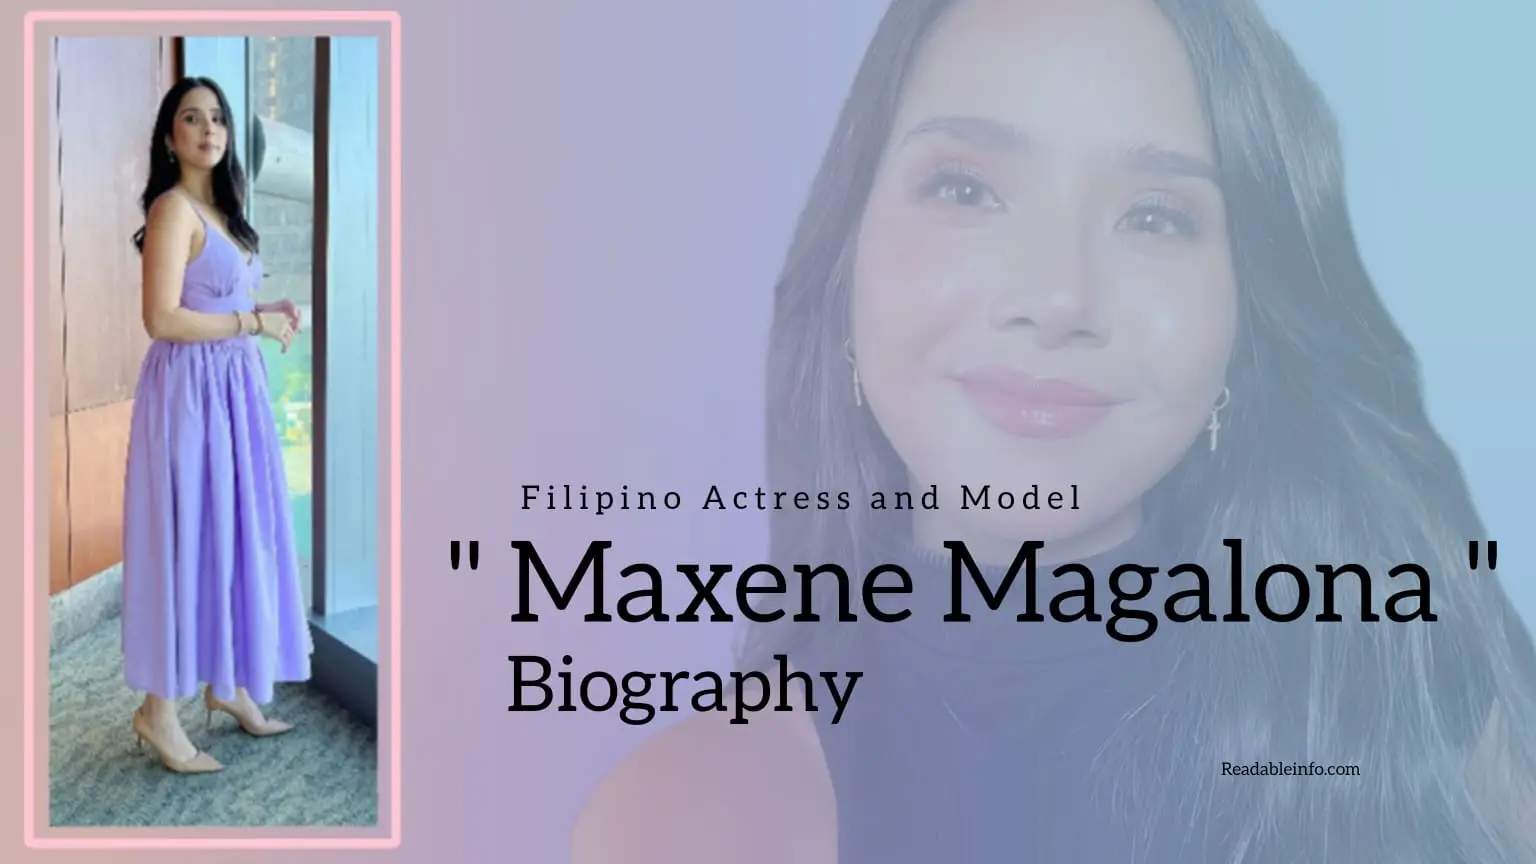 You are currently viewing Maxene Magalona Biography (Filipino Actress And Model)